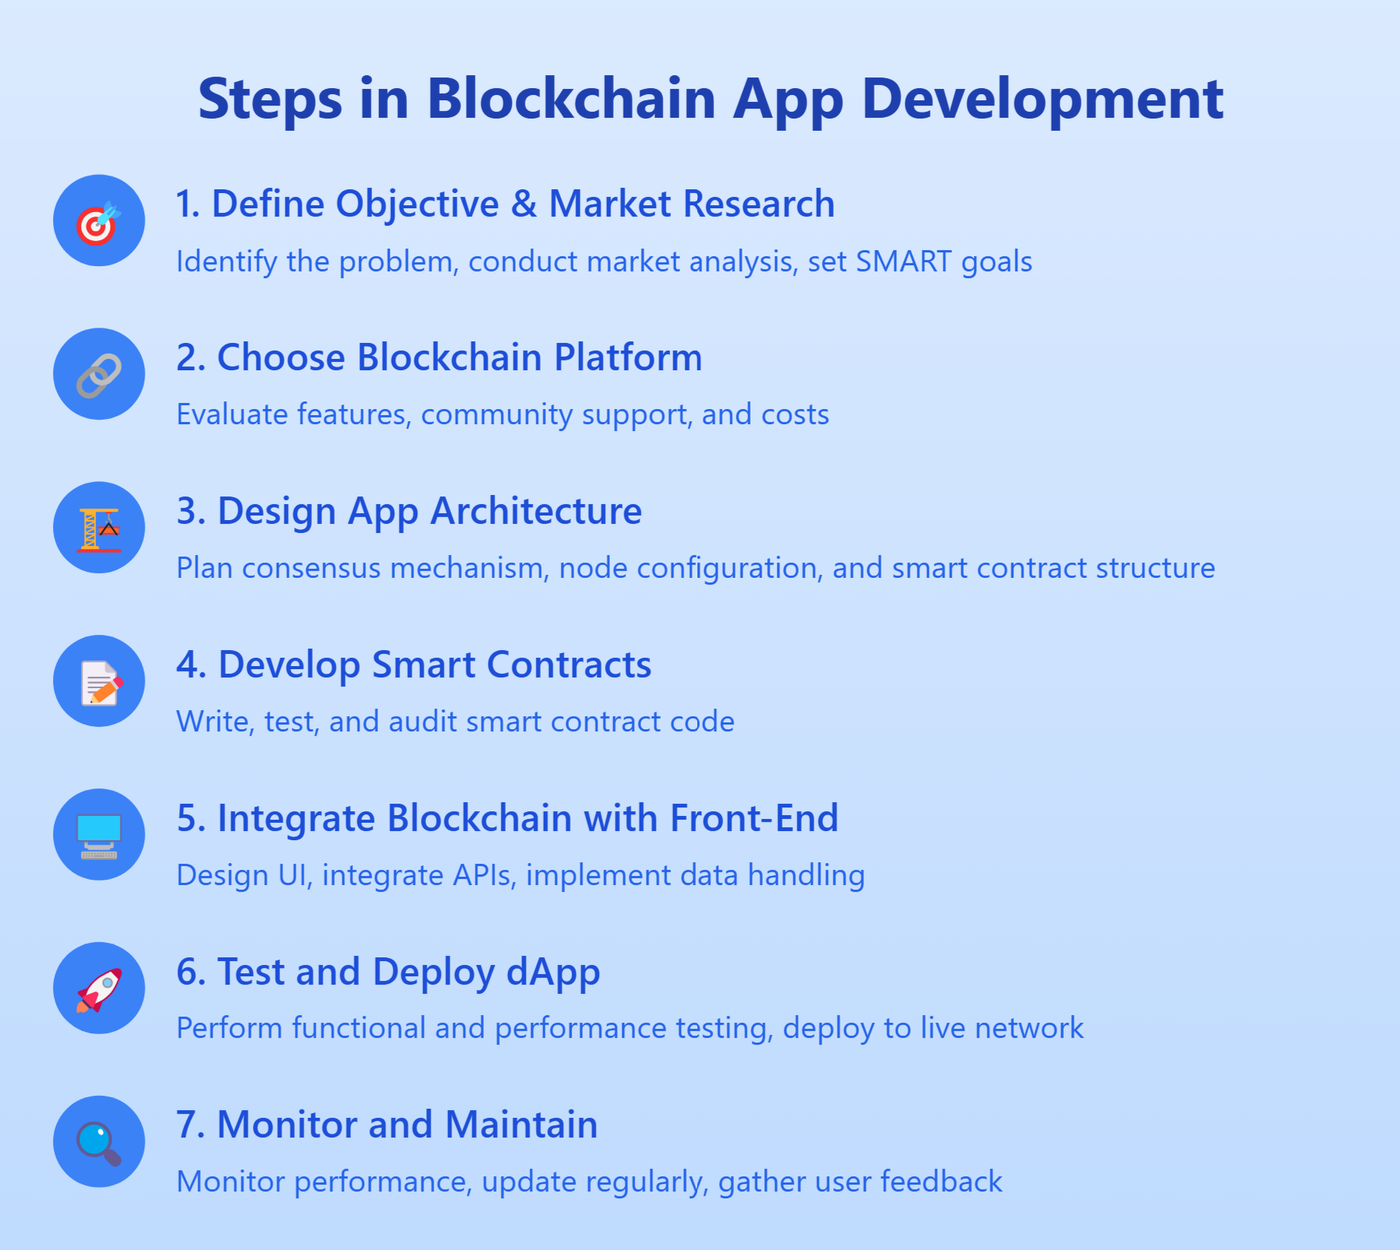 Infographic showing 7 steps in blockchain app development. Vertical timeline with icons for each step: 1. Define Objective, 2. Choose Platform, 3. Design Architecture, 4. Develop Smart Contracts, 5. Integrate Front-End, 6. Test and Deploy, 7. Monitor and Maintain. Each step includes a brief description of key activities